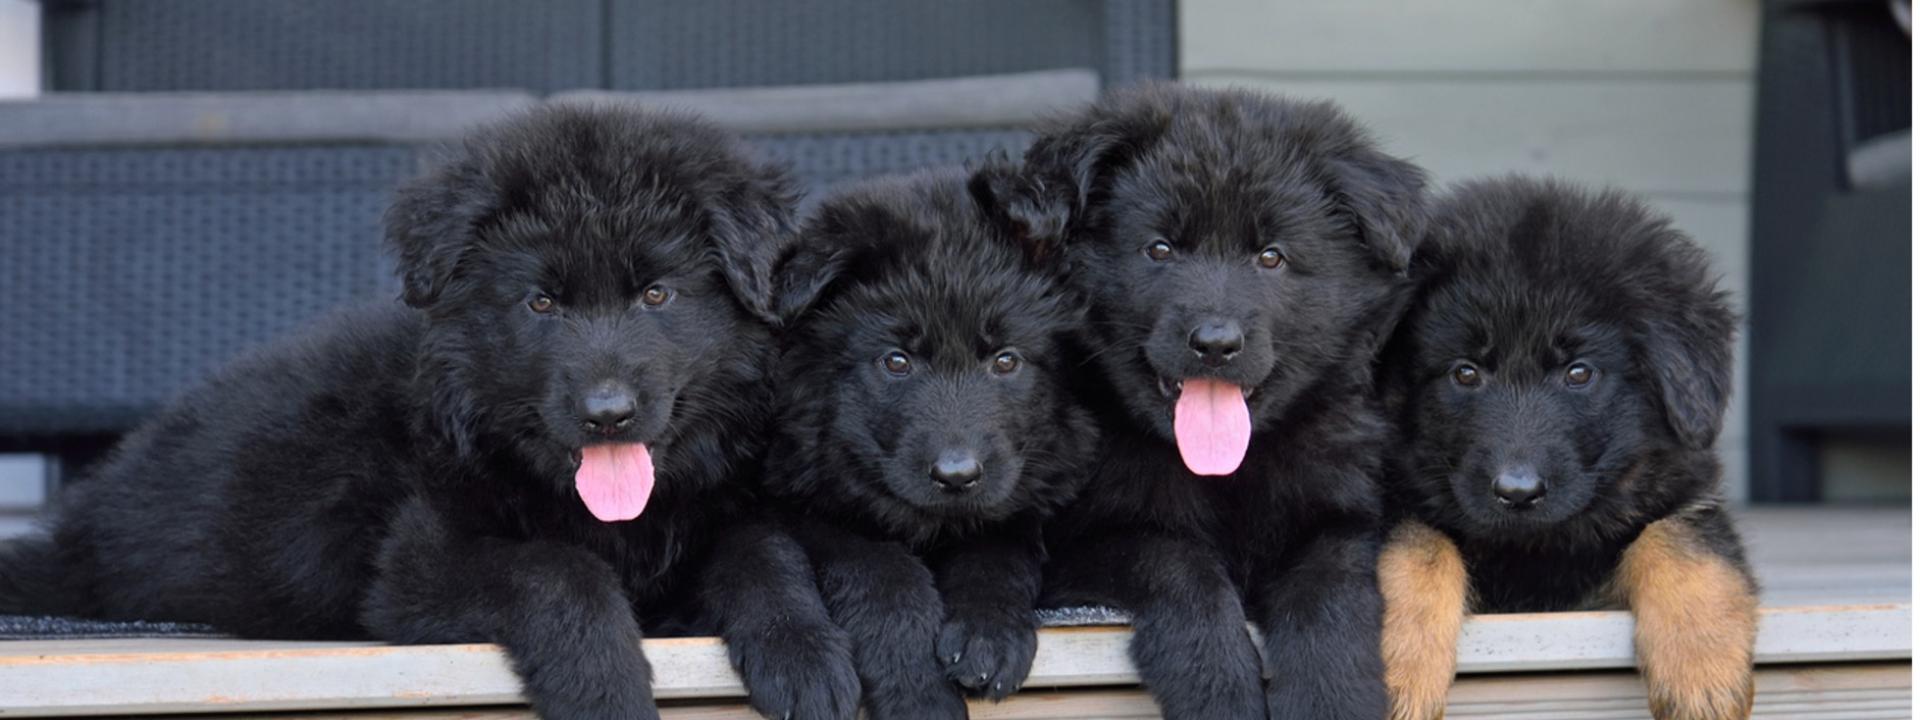 A group of black puppies, Safe and Sound: Preventing and Treating Parvo in Puppies